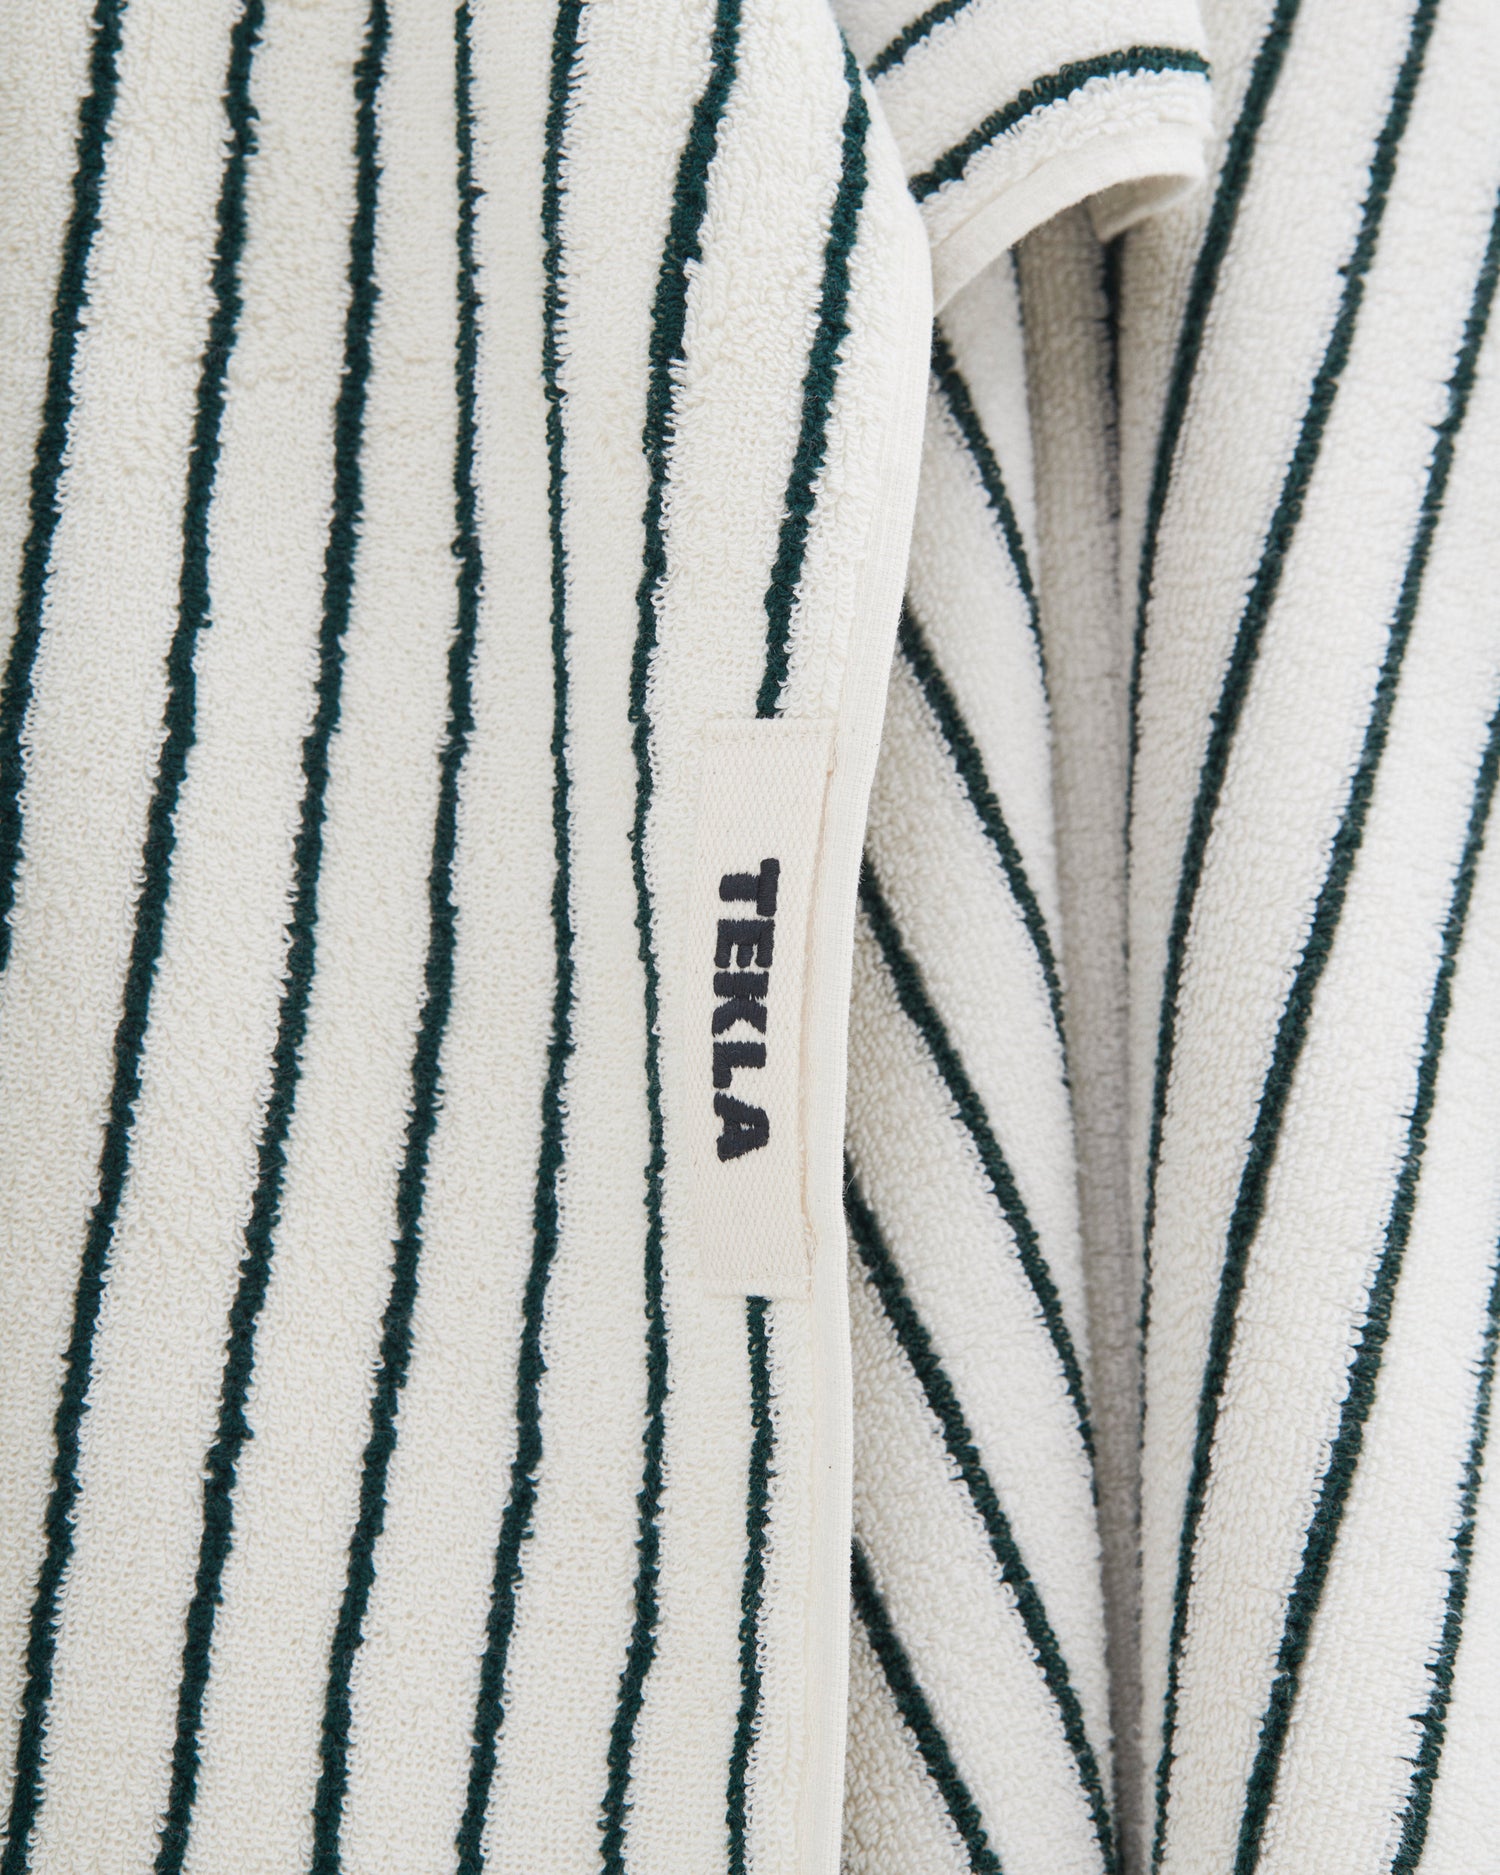 Terry Hand Towel - Striped, racing green